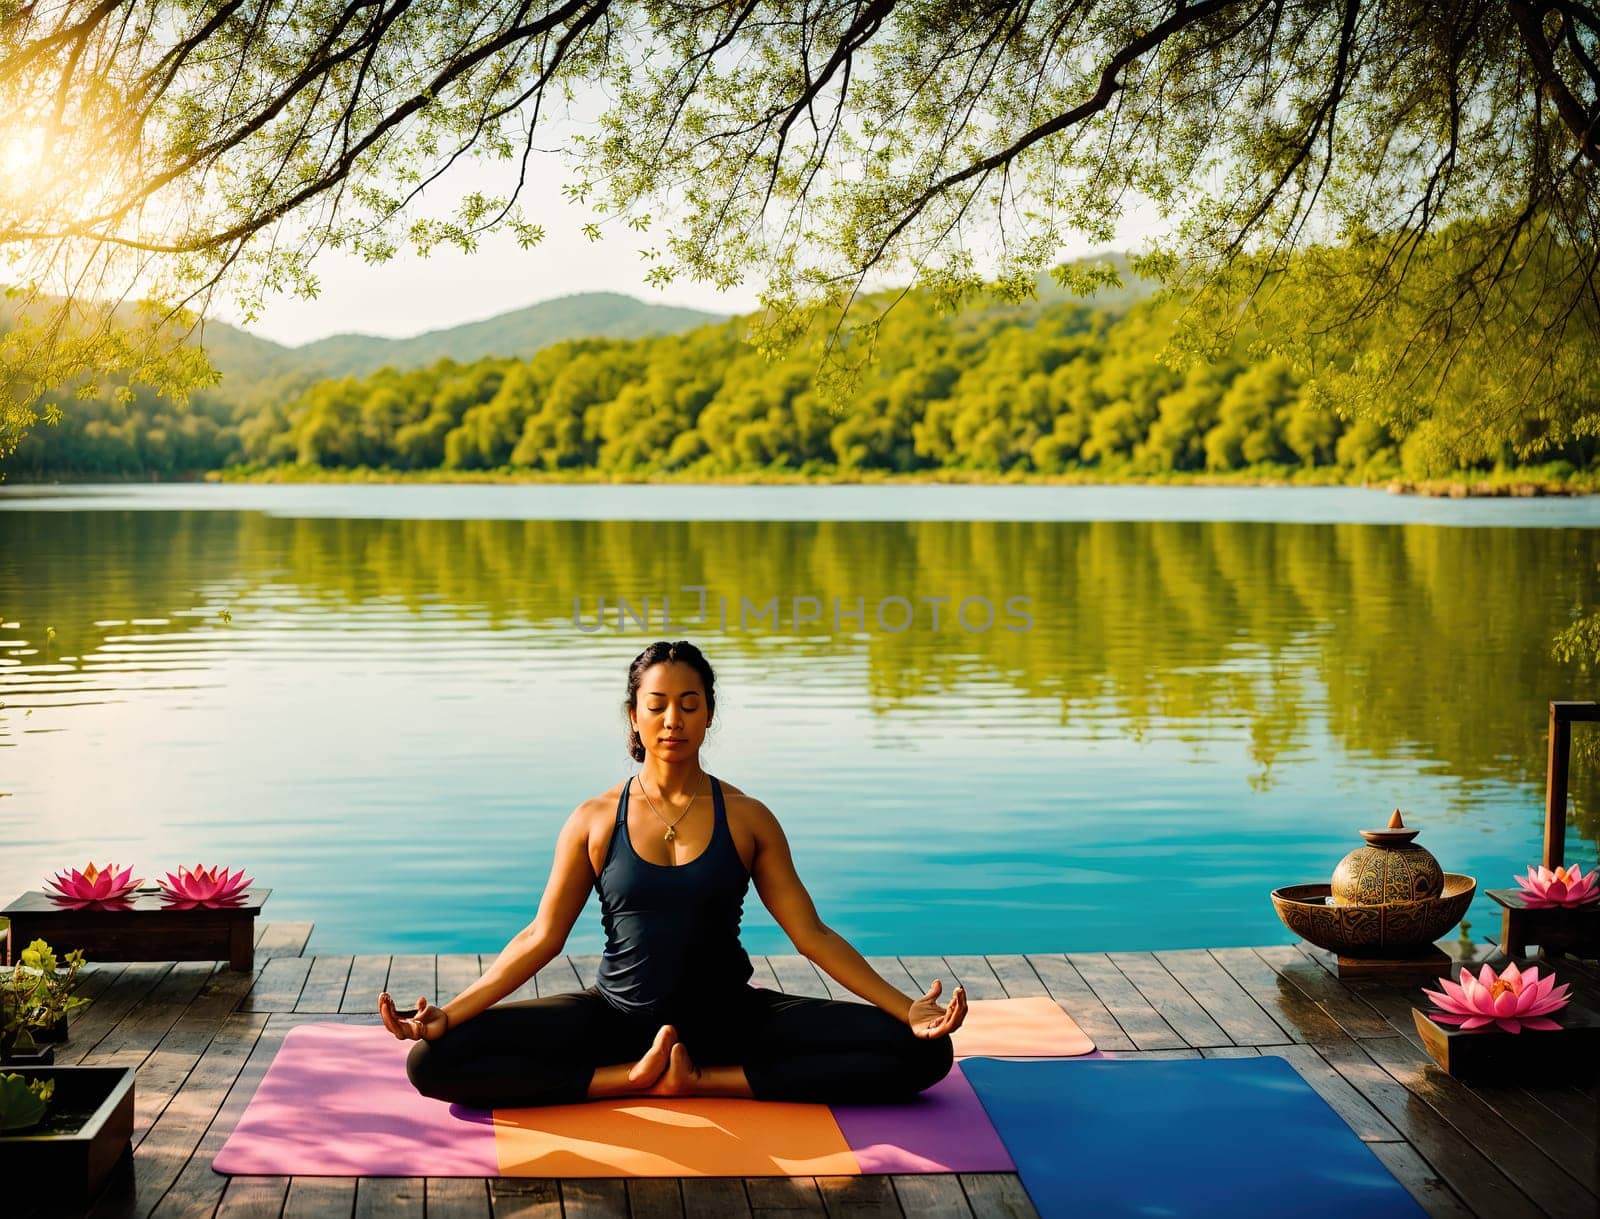 A woman sitting on a yoga mat in front of a body of water. by creart